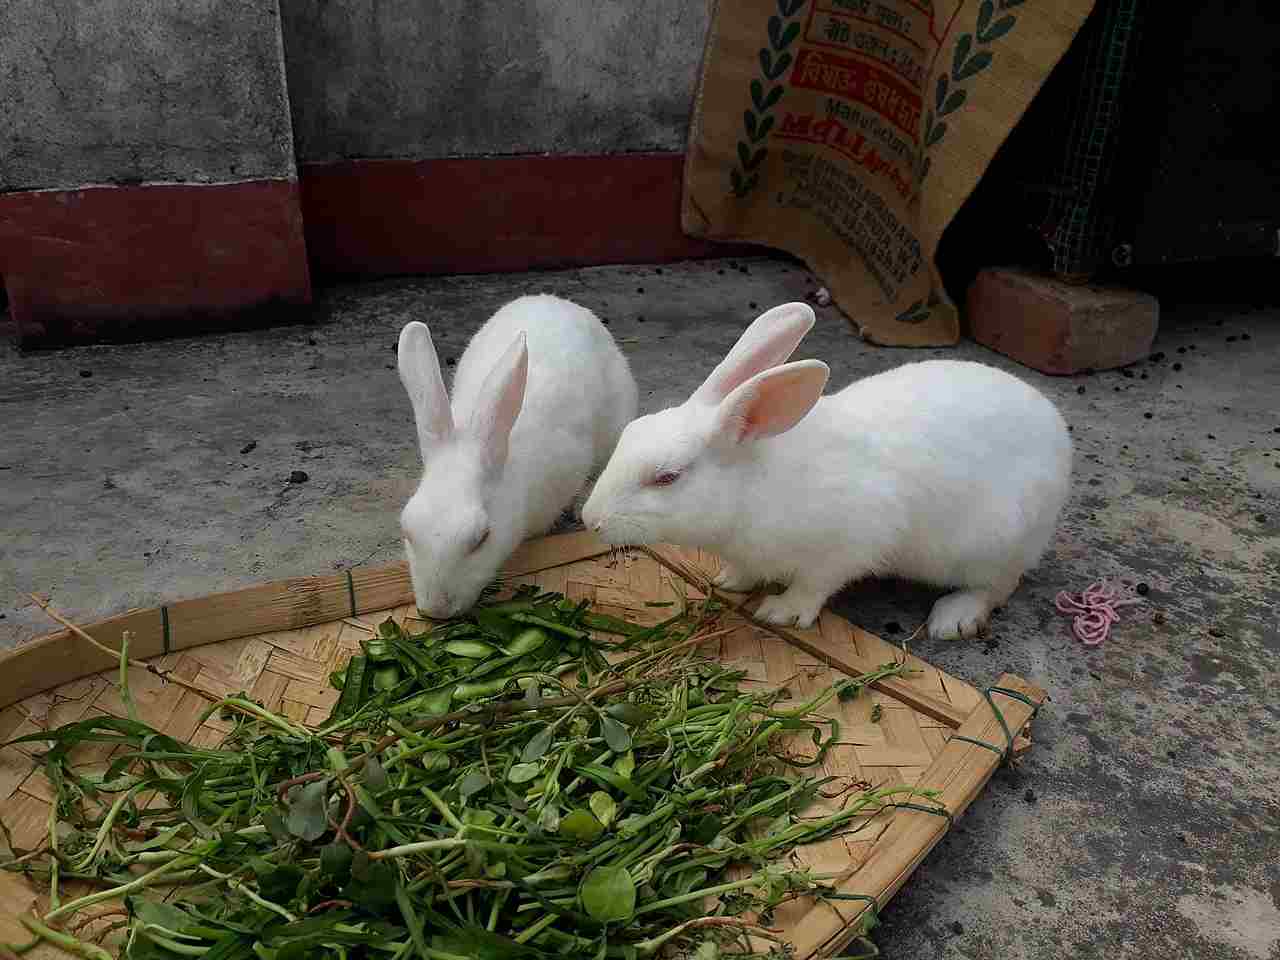 Is a Rabbit a Herbivore, Carnivore or Omnivore: Rabbit Diet is Comprised Mostly/Exclusively of Plant Matter (Credit: Pinakpani 2020 .CC BY-SA 4.0.)